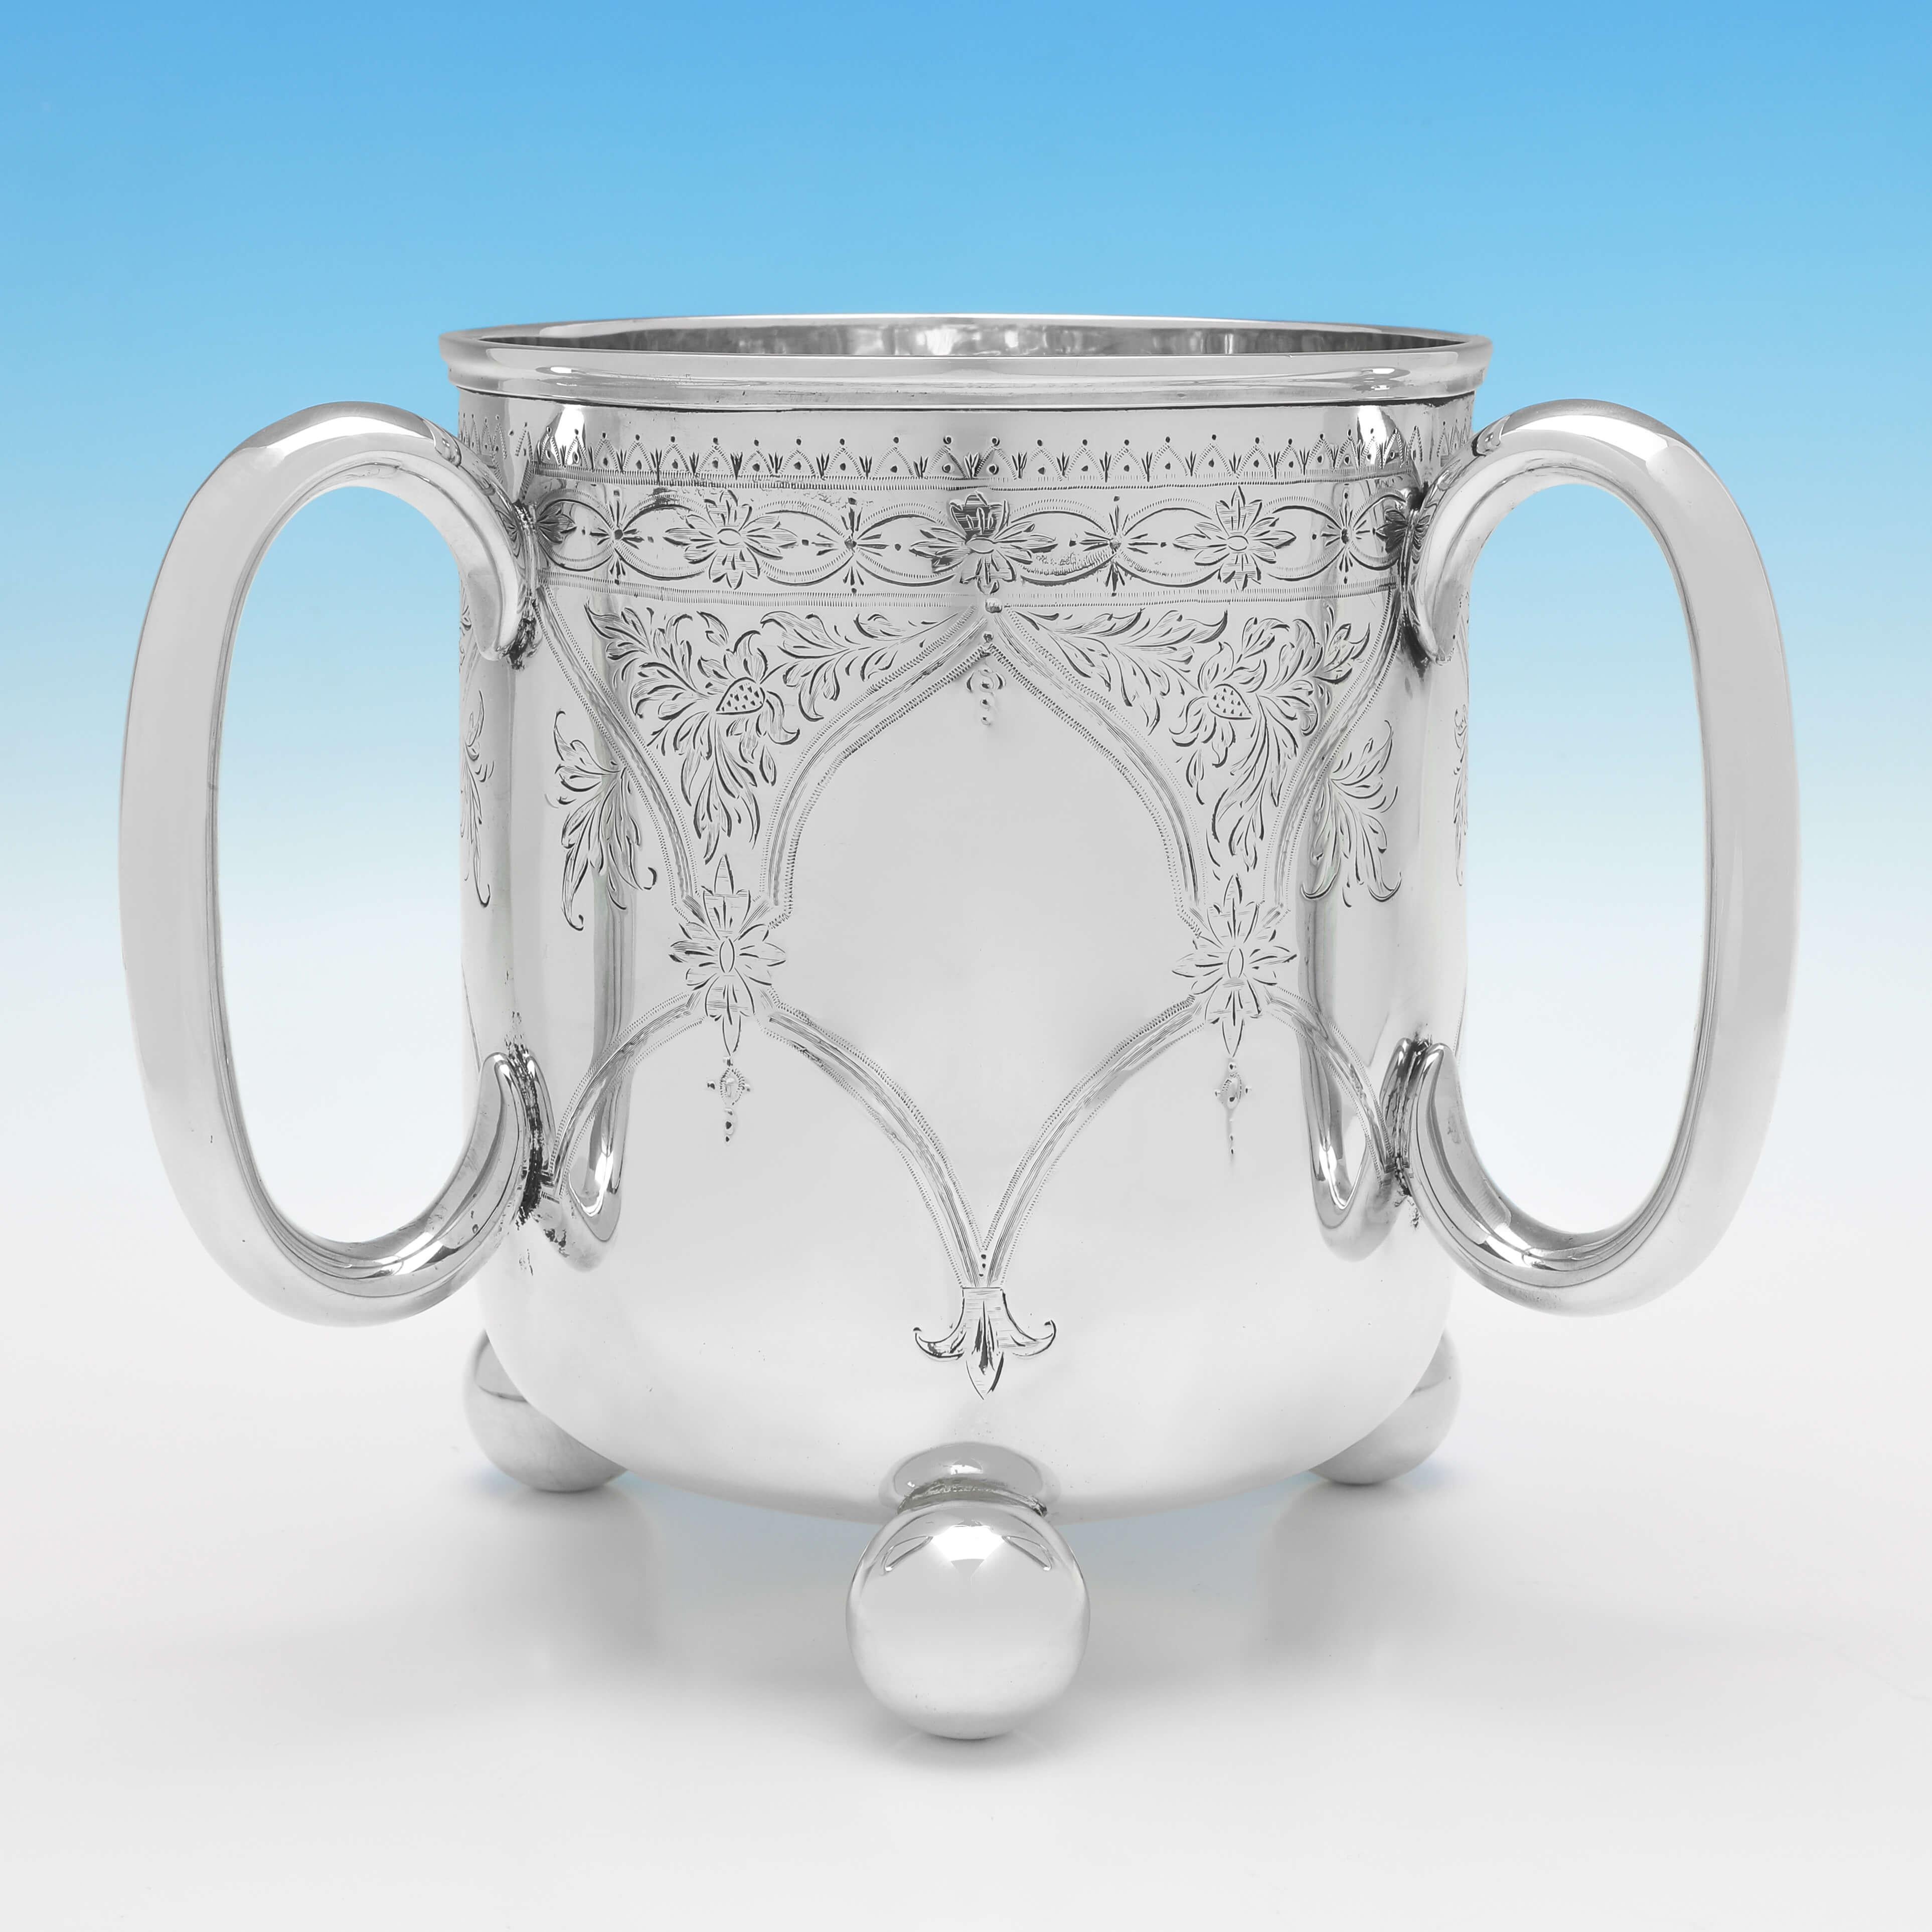 English Industrialist Design Victorian Sterling Silver Cup or Wine Cooler, London, 1881 For Sale